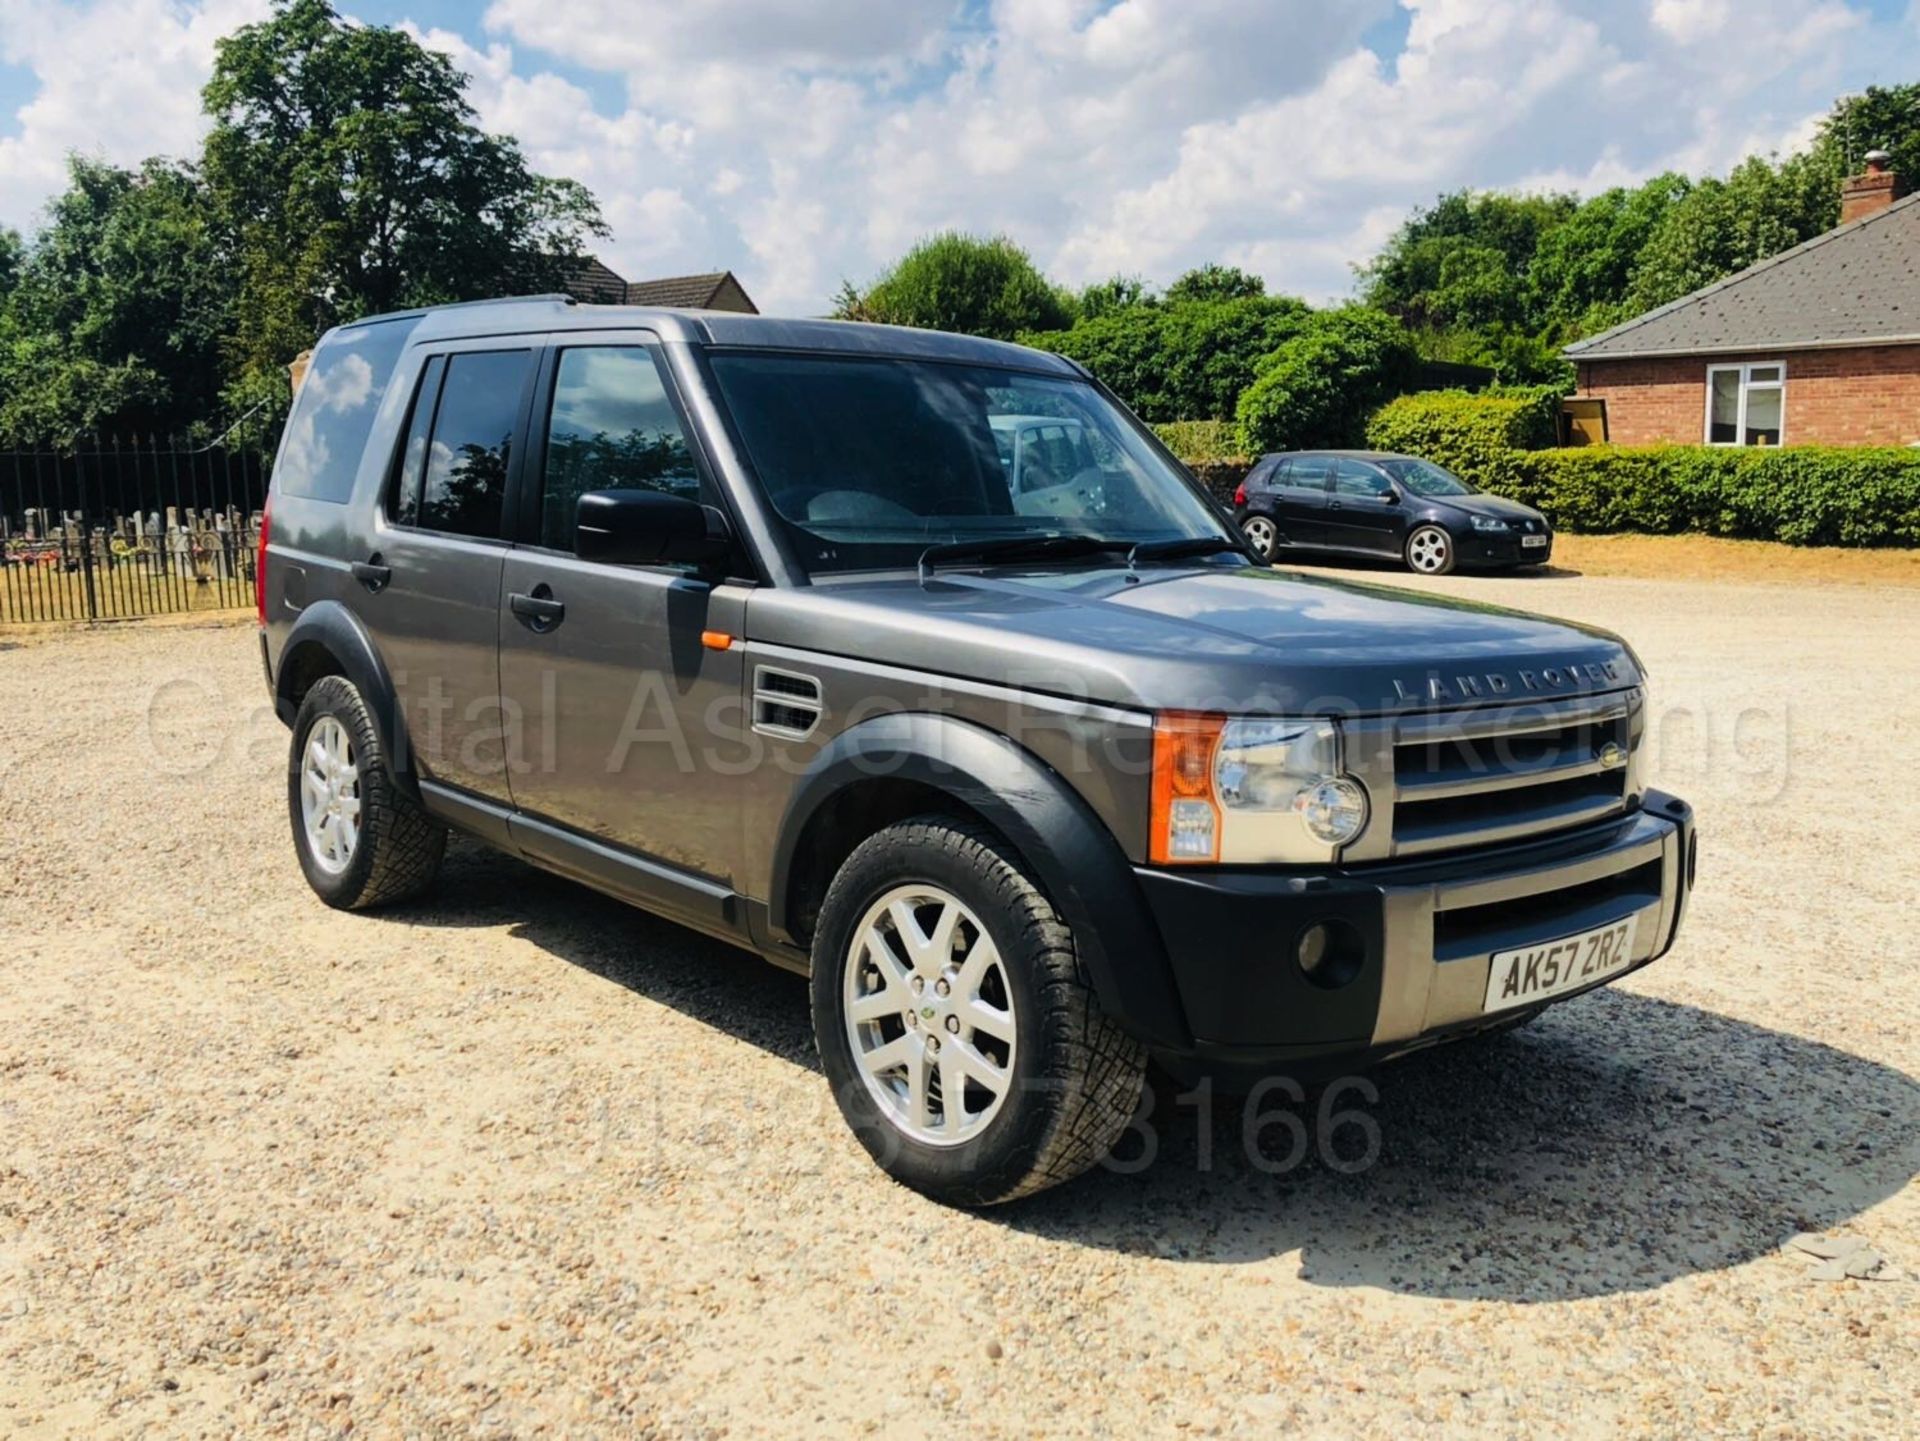 (On Sale) LAND ROVER DISCOVERY 3 'XS EDITION' **COMMERCIAL VAN**(2008 MODEL) 'TDV6-190 BHP' (NO VAT) - Image 12 of 37